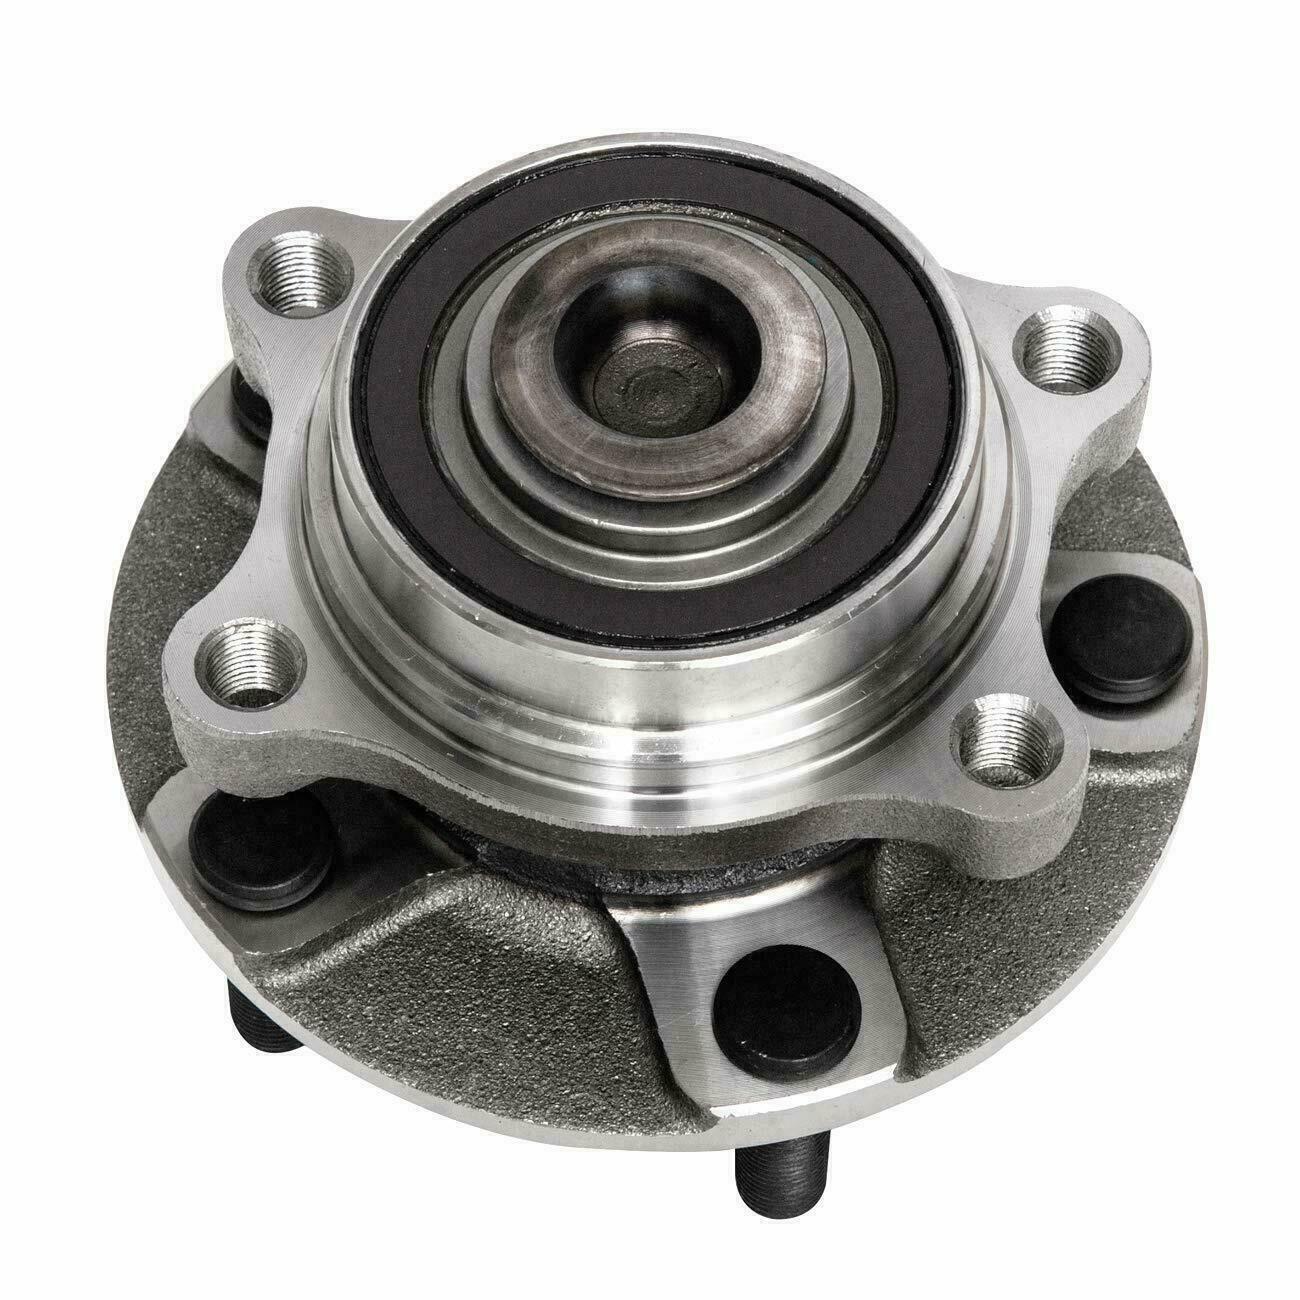 JADODE Front Wheel Bearing Hub For 2003-2005 Ford Crown Victoria Lincoln Town Car 5 Lug